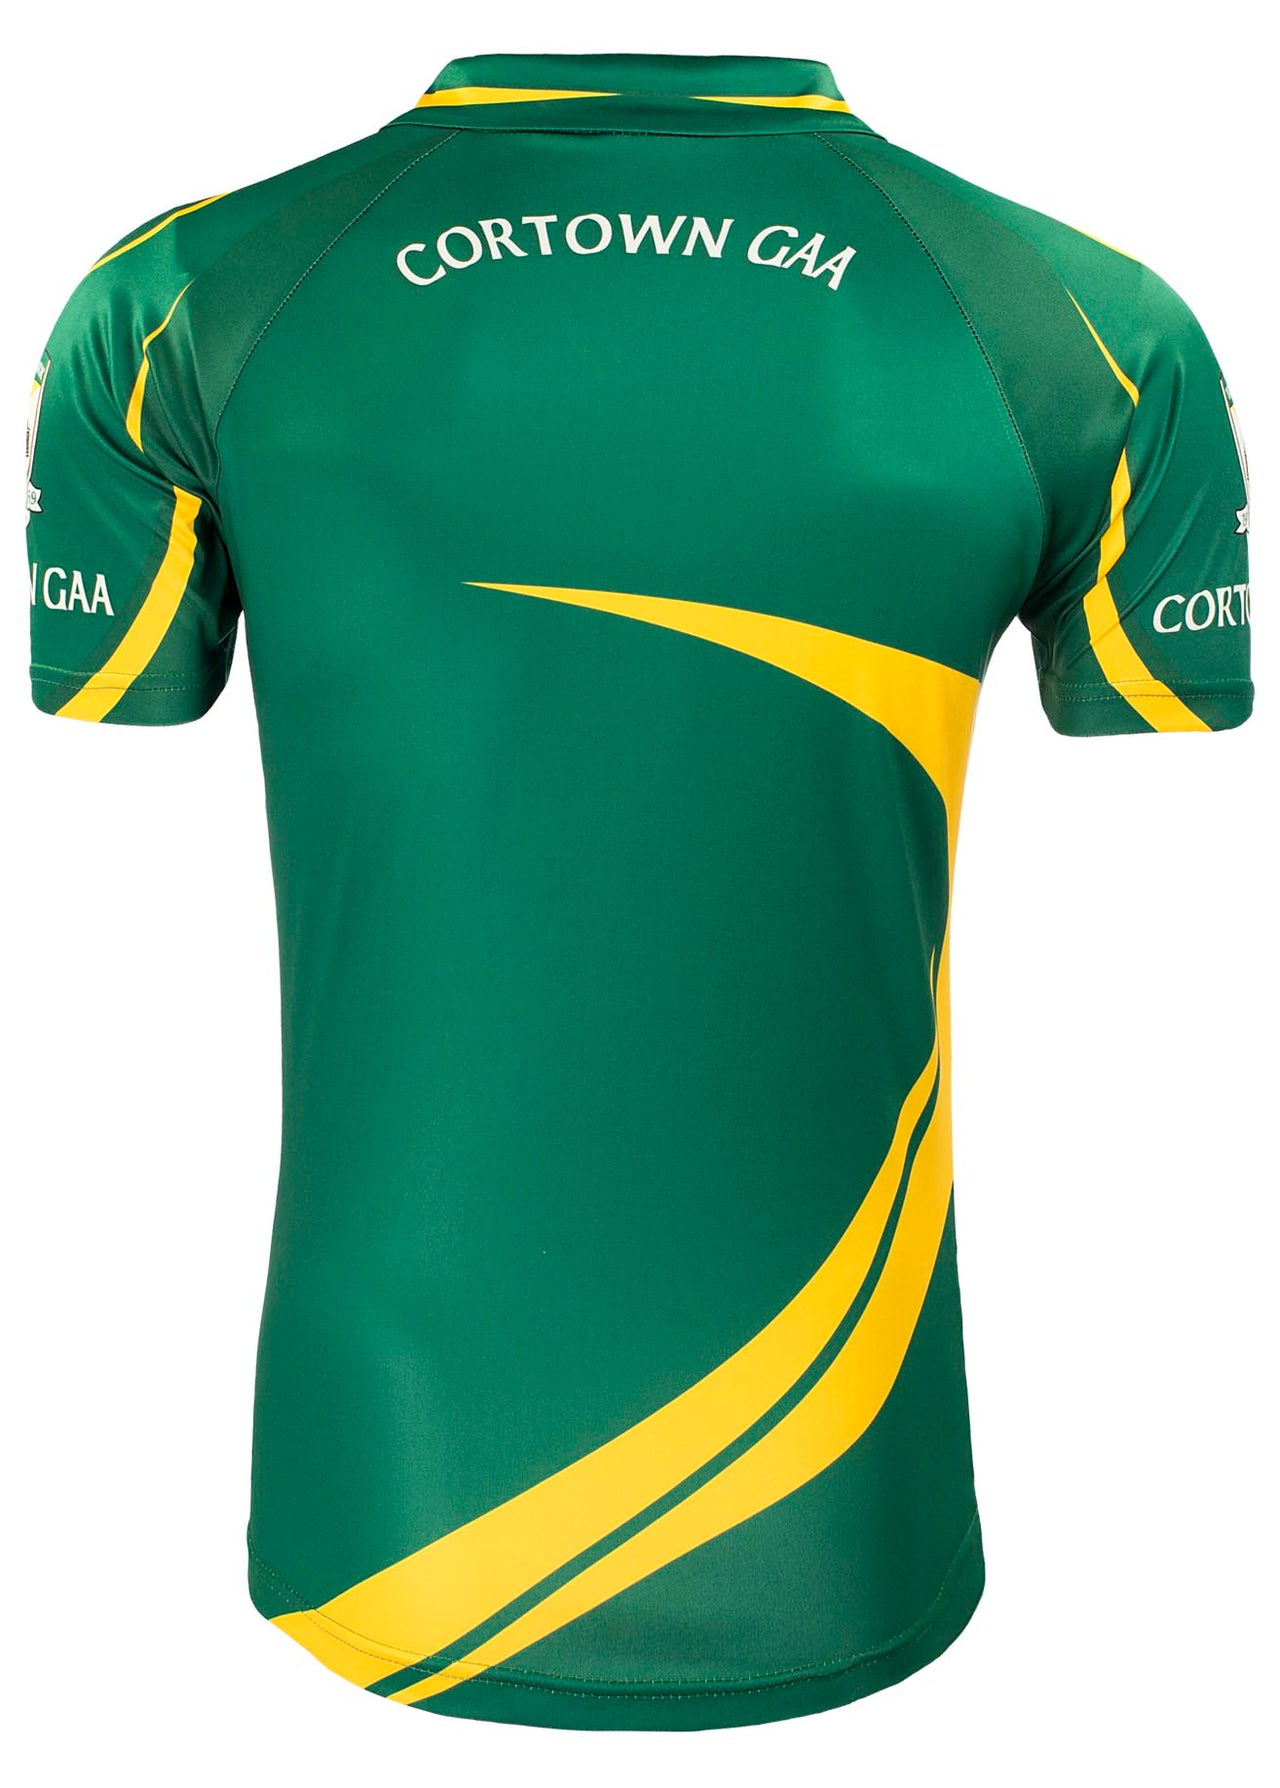 Cortown GFC Away Jersey Player Fit Adult